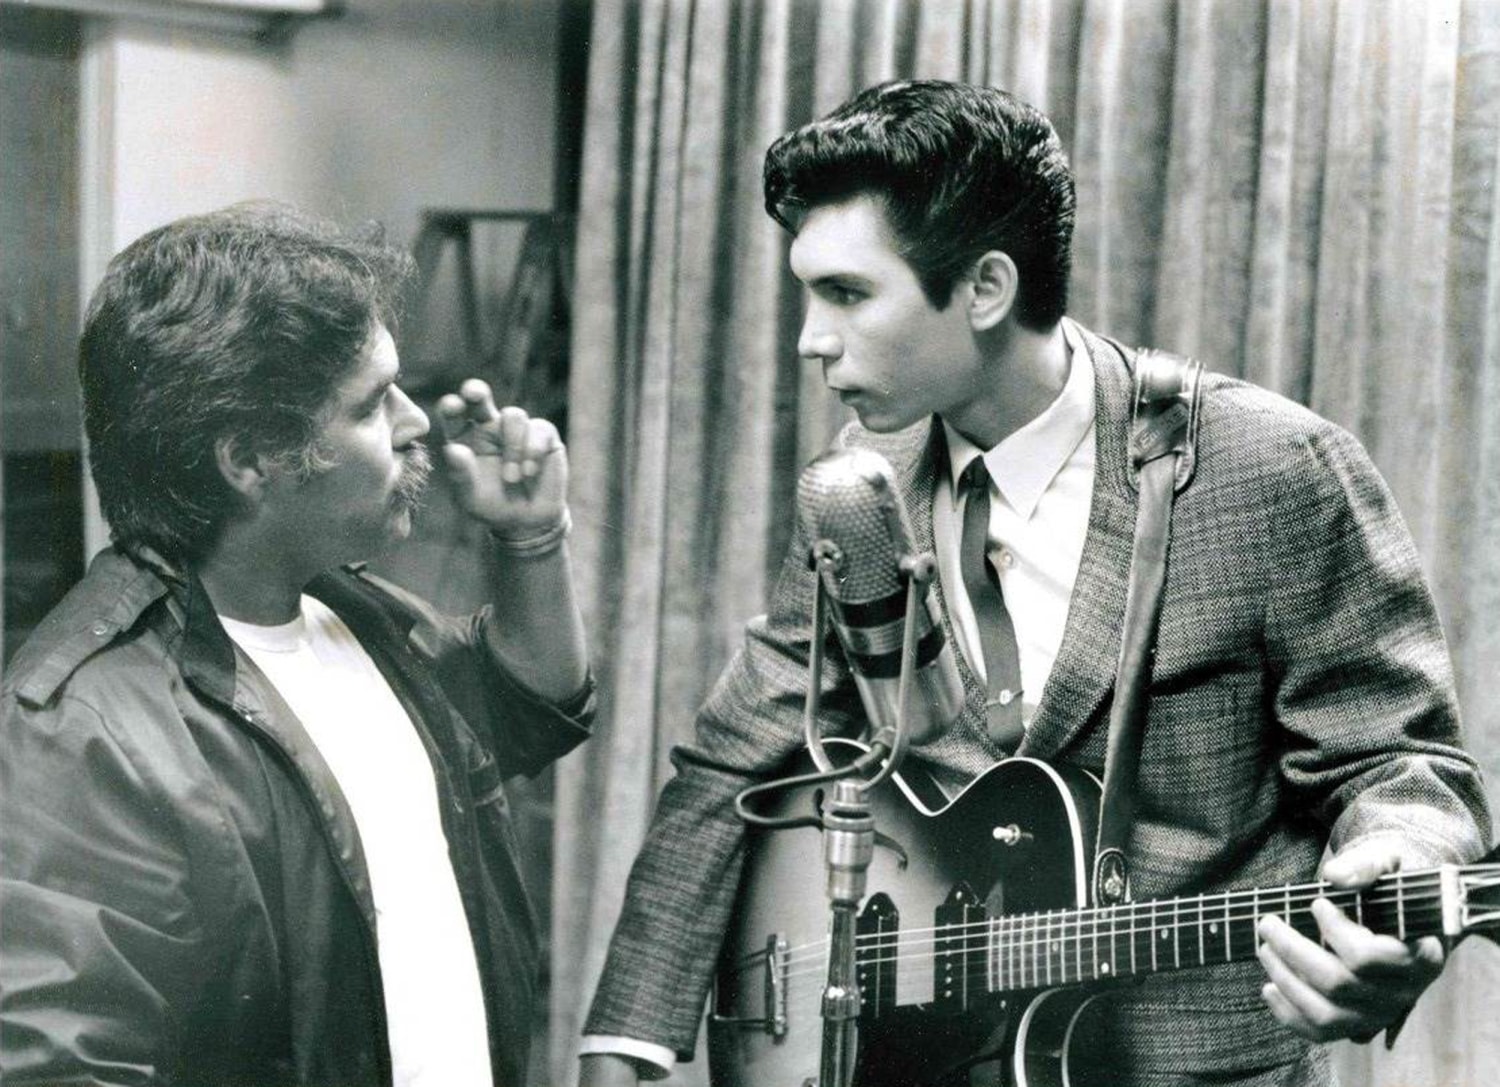 La Bamba' At 30: Director Luis Valdez, Esai Morales Talk About Film that Redefined Latino Roles